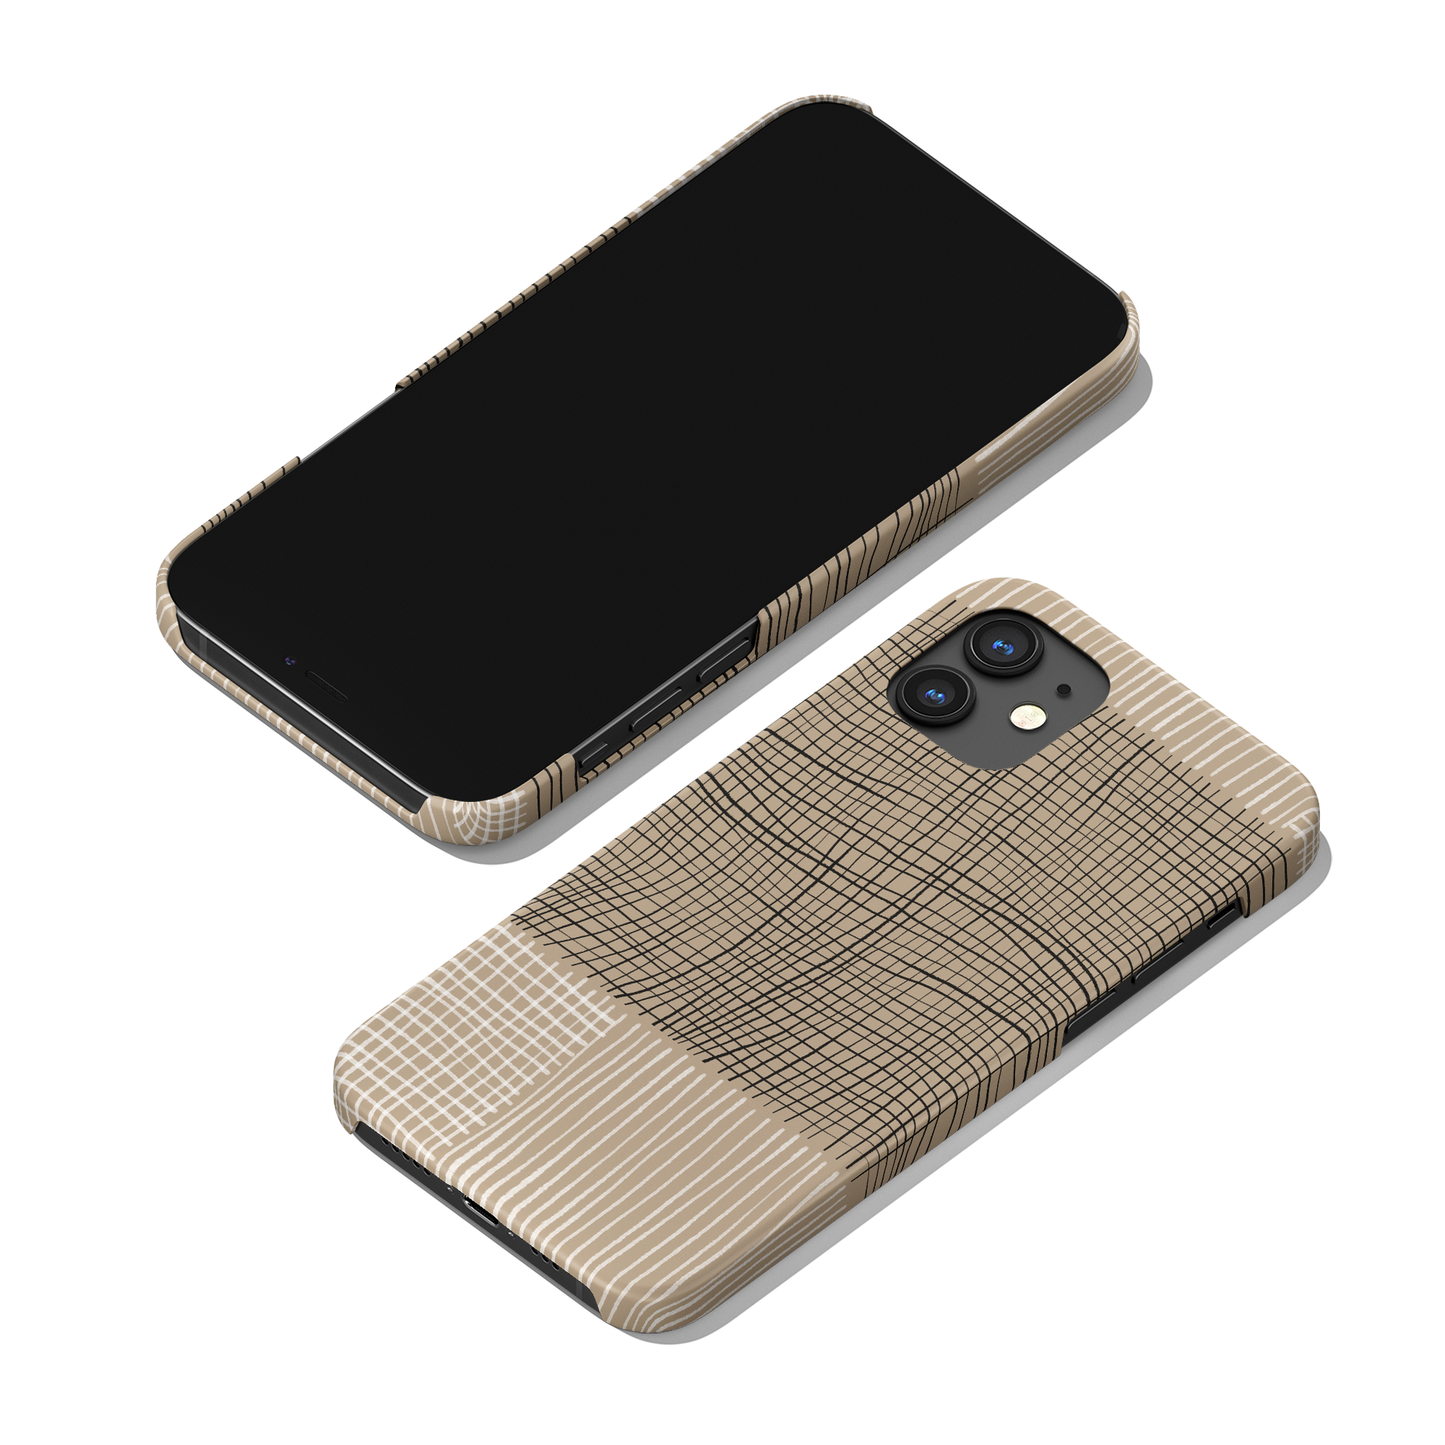 Rustic Beige Checkered Abstract iPhone Case